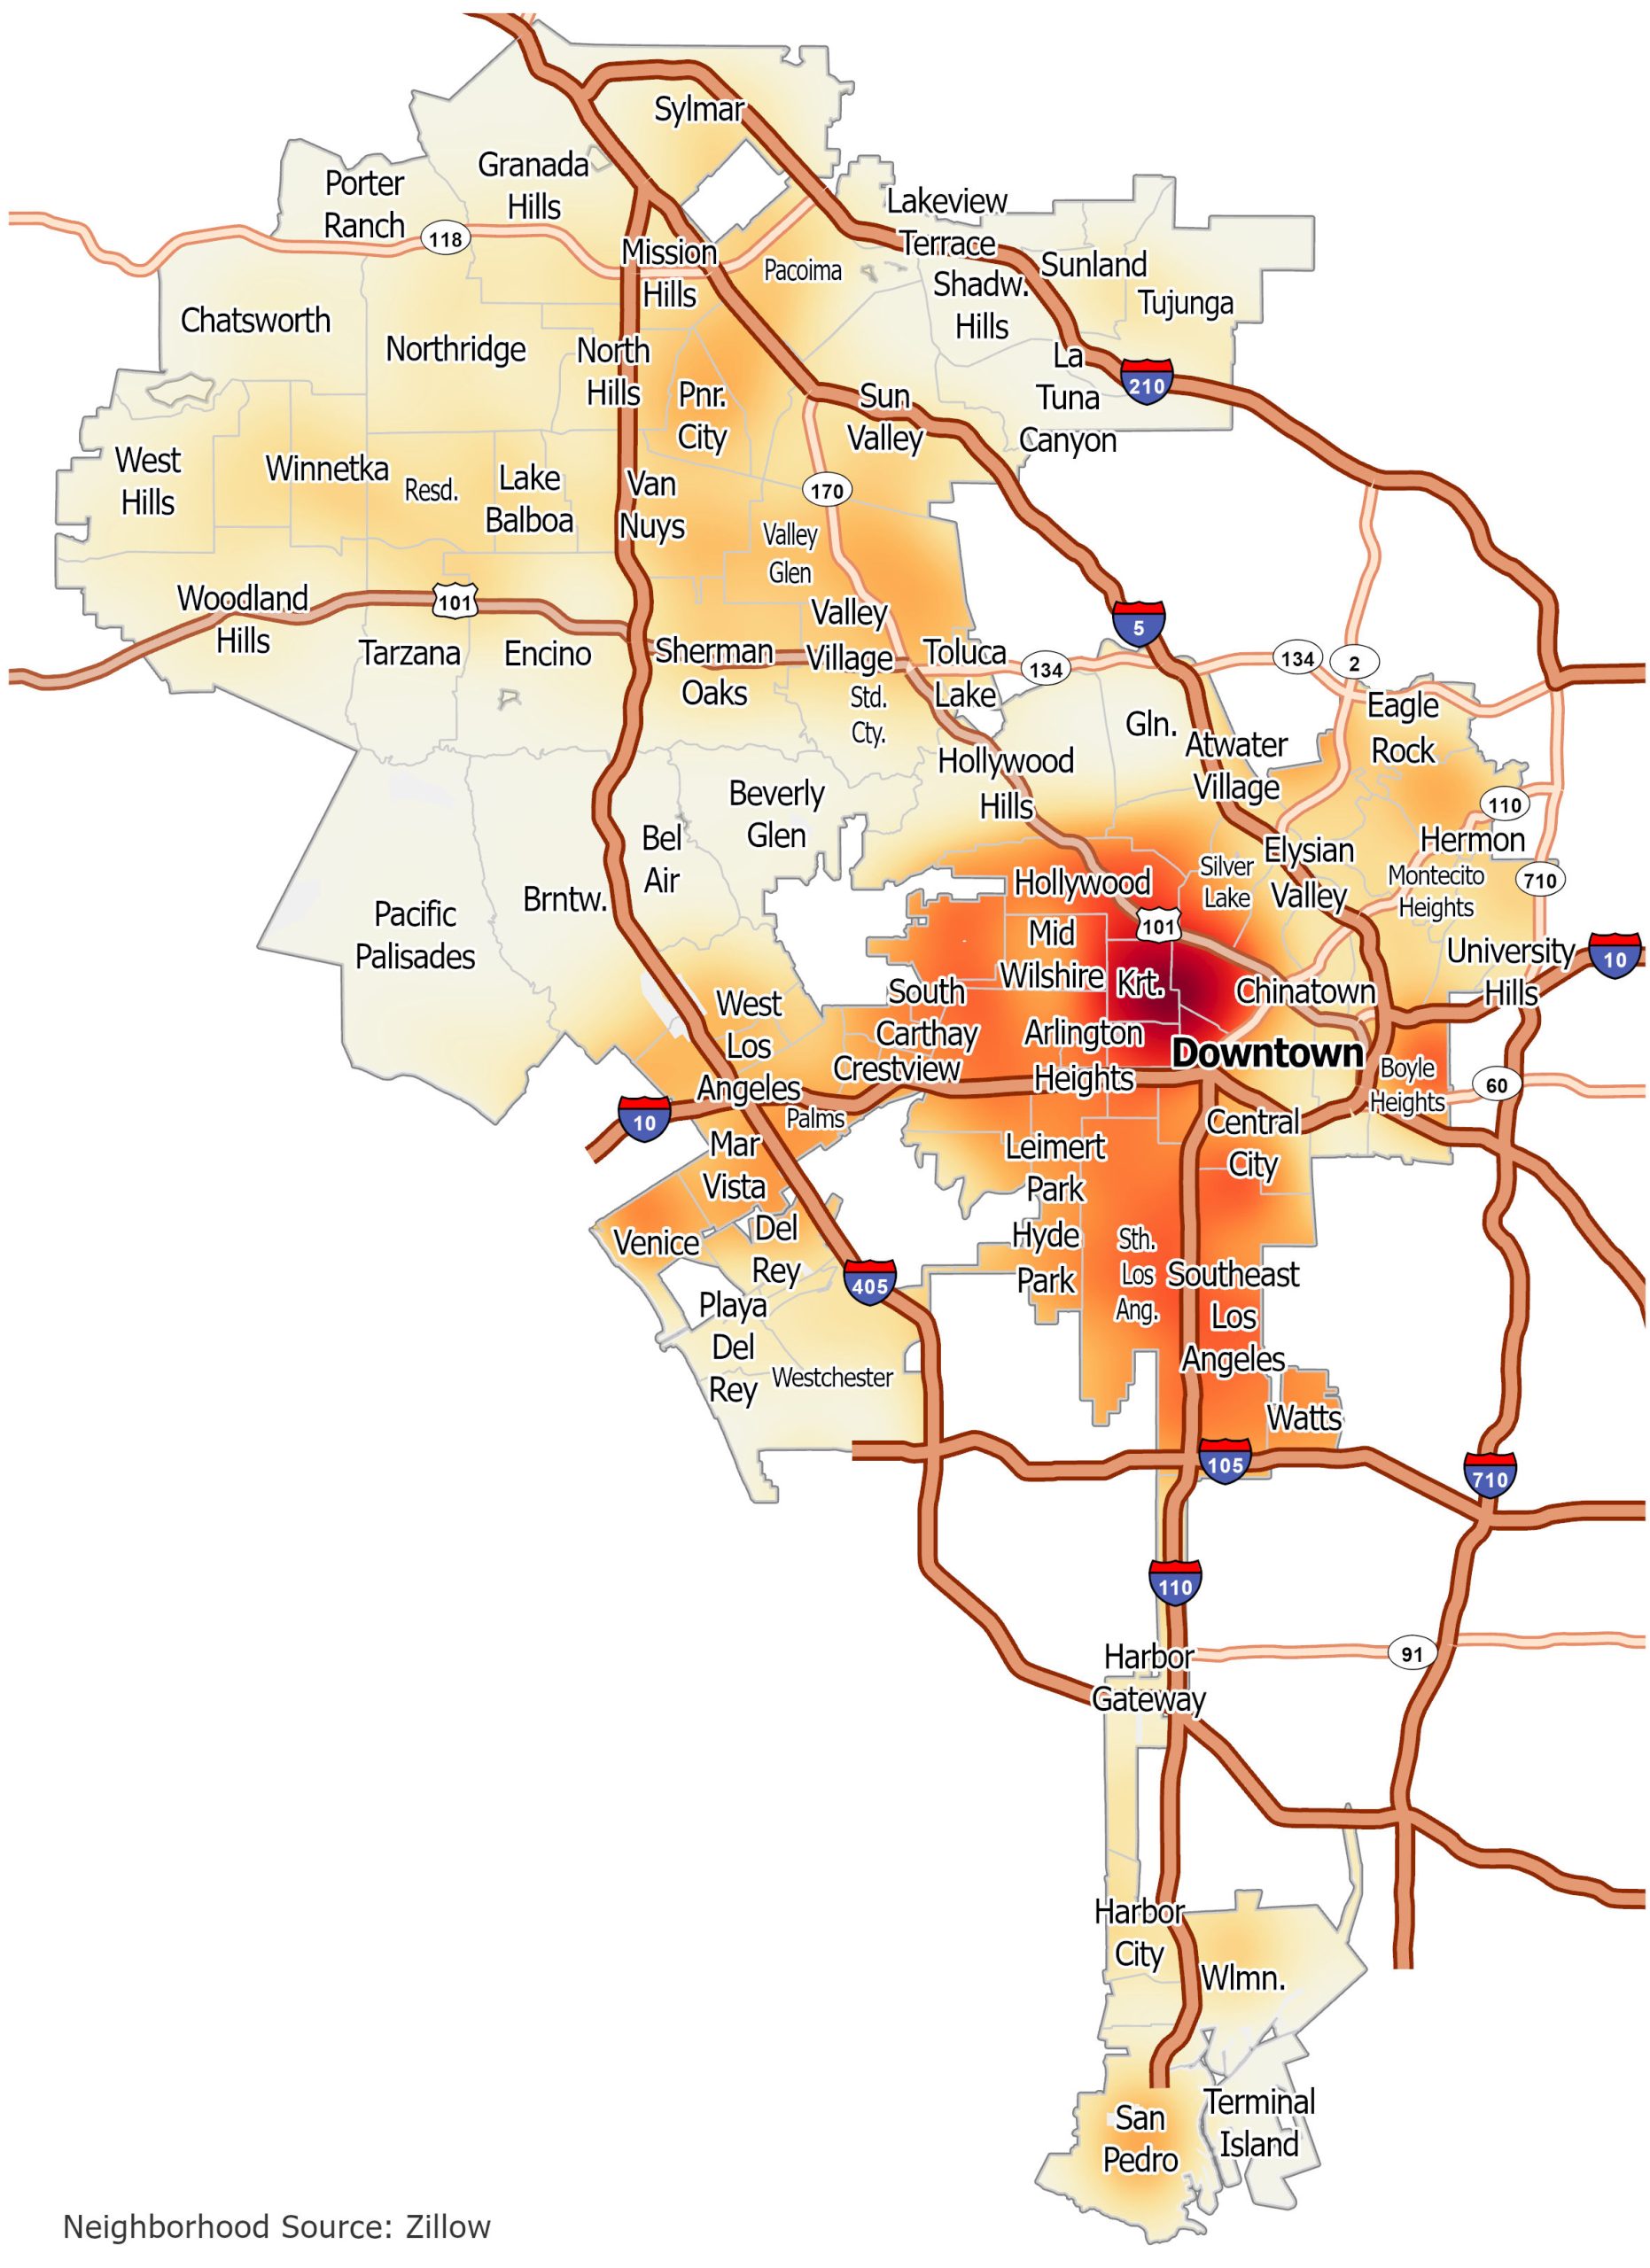 5 Most Dangerous Areas in Los Angeles, CA